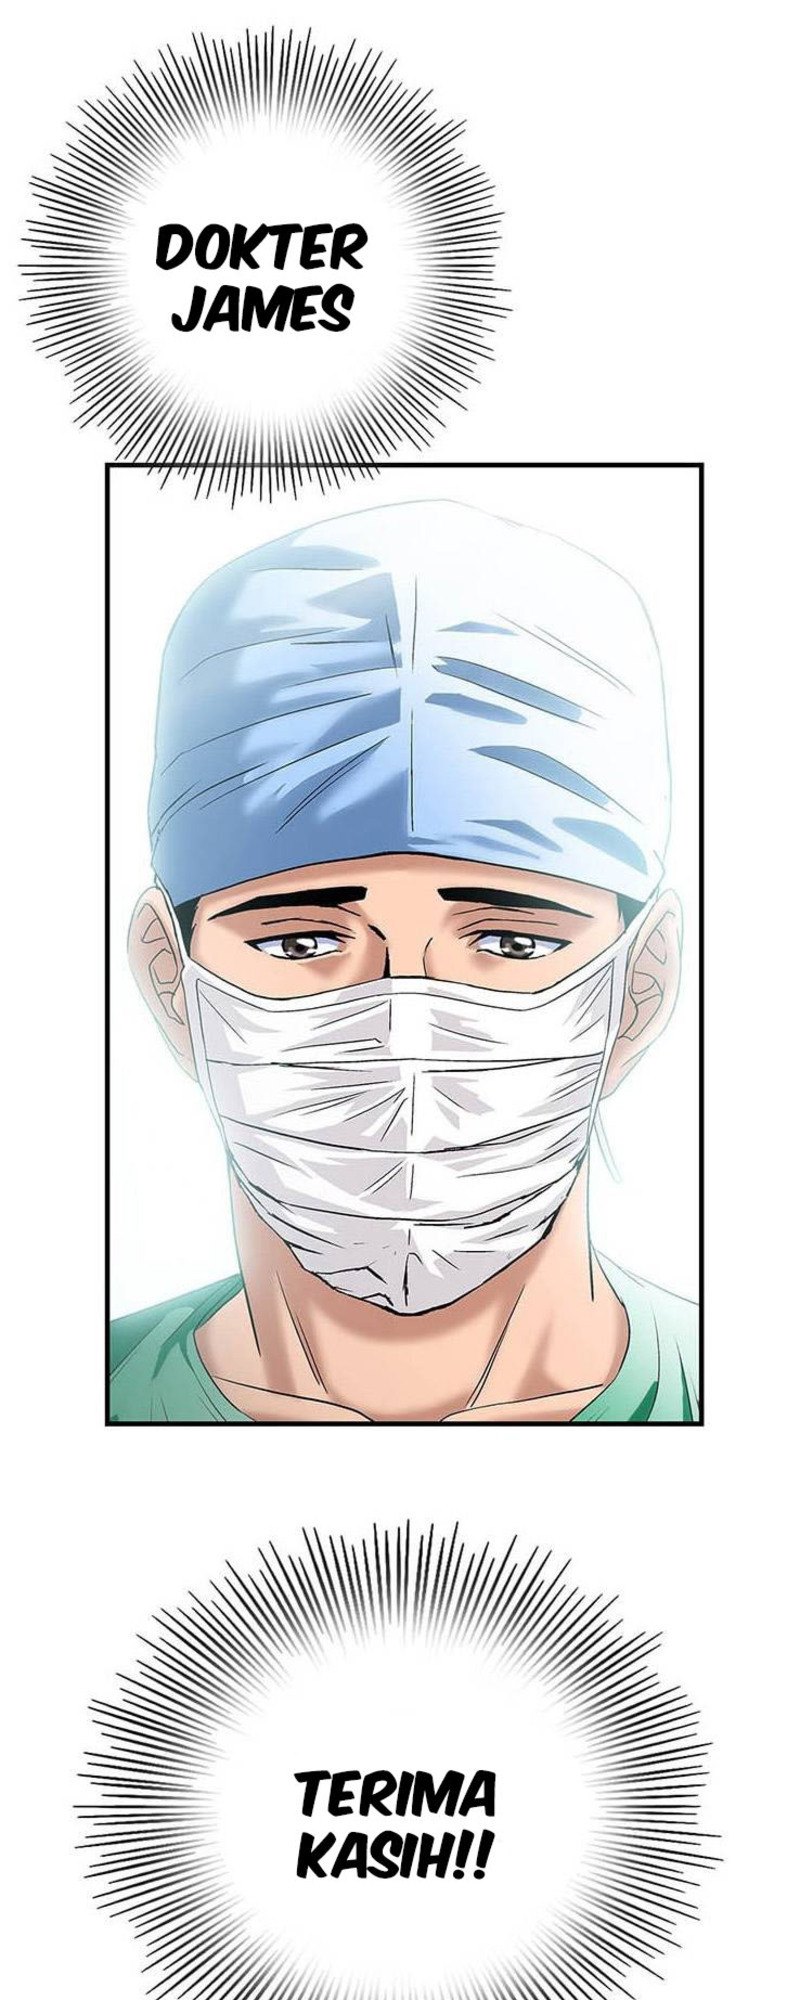 Dr. Choi Tae-Soo Chapter 48